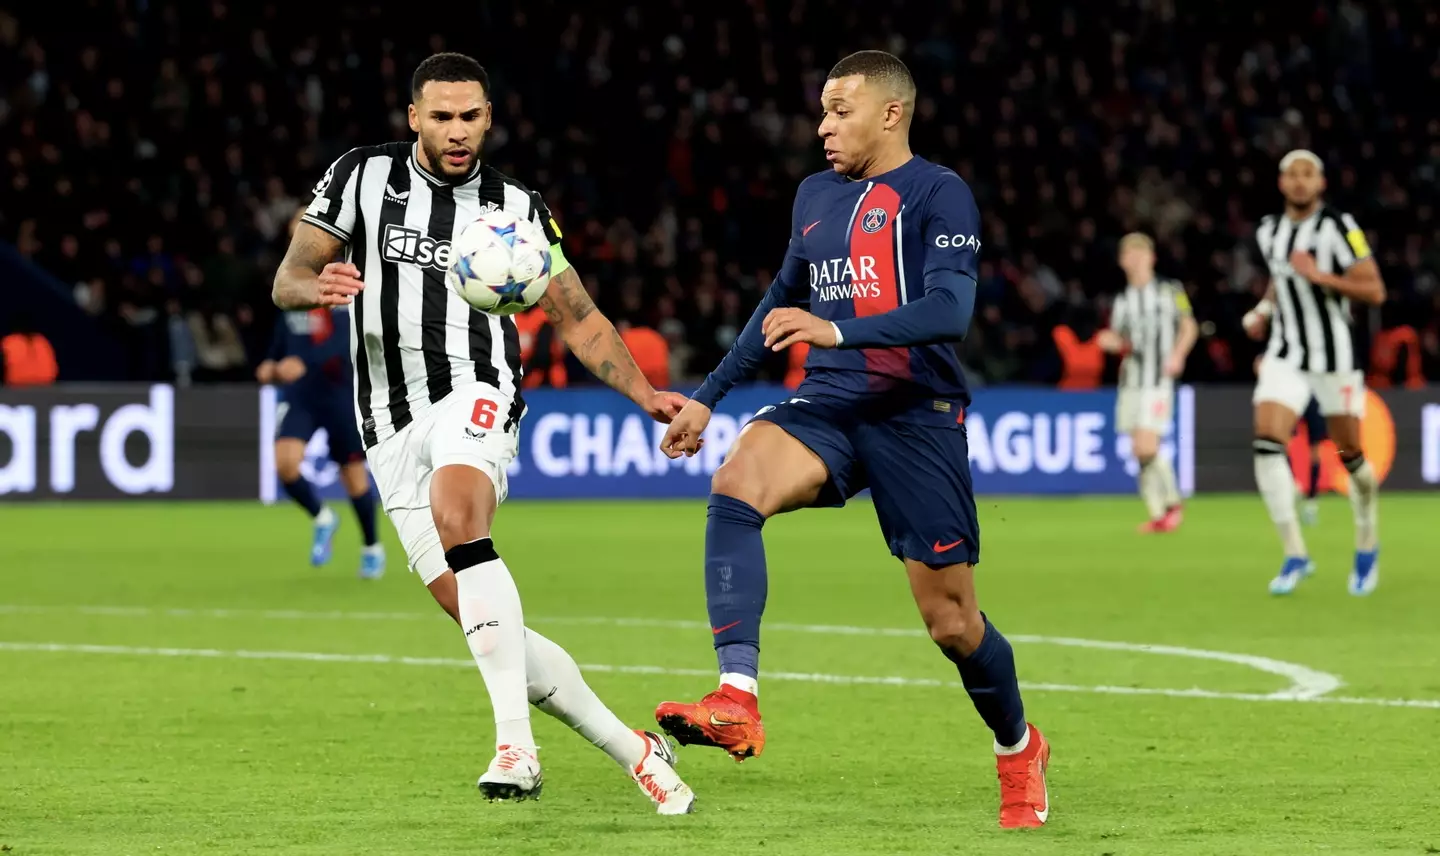 Mbappe tussling with Lascelles, without his armband on. (Image